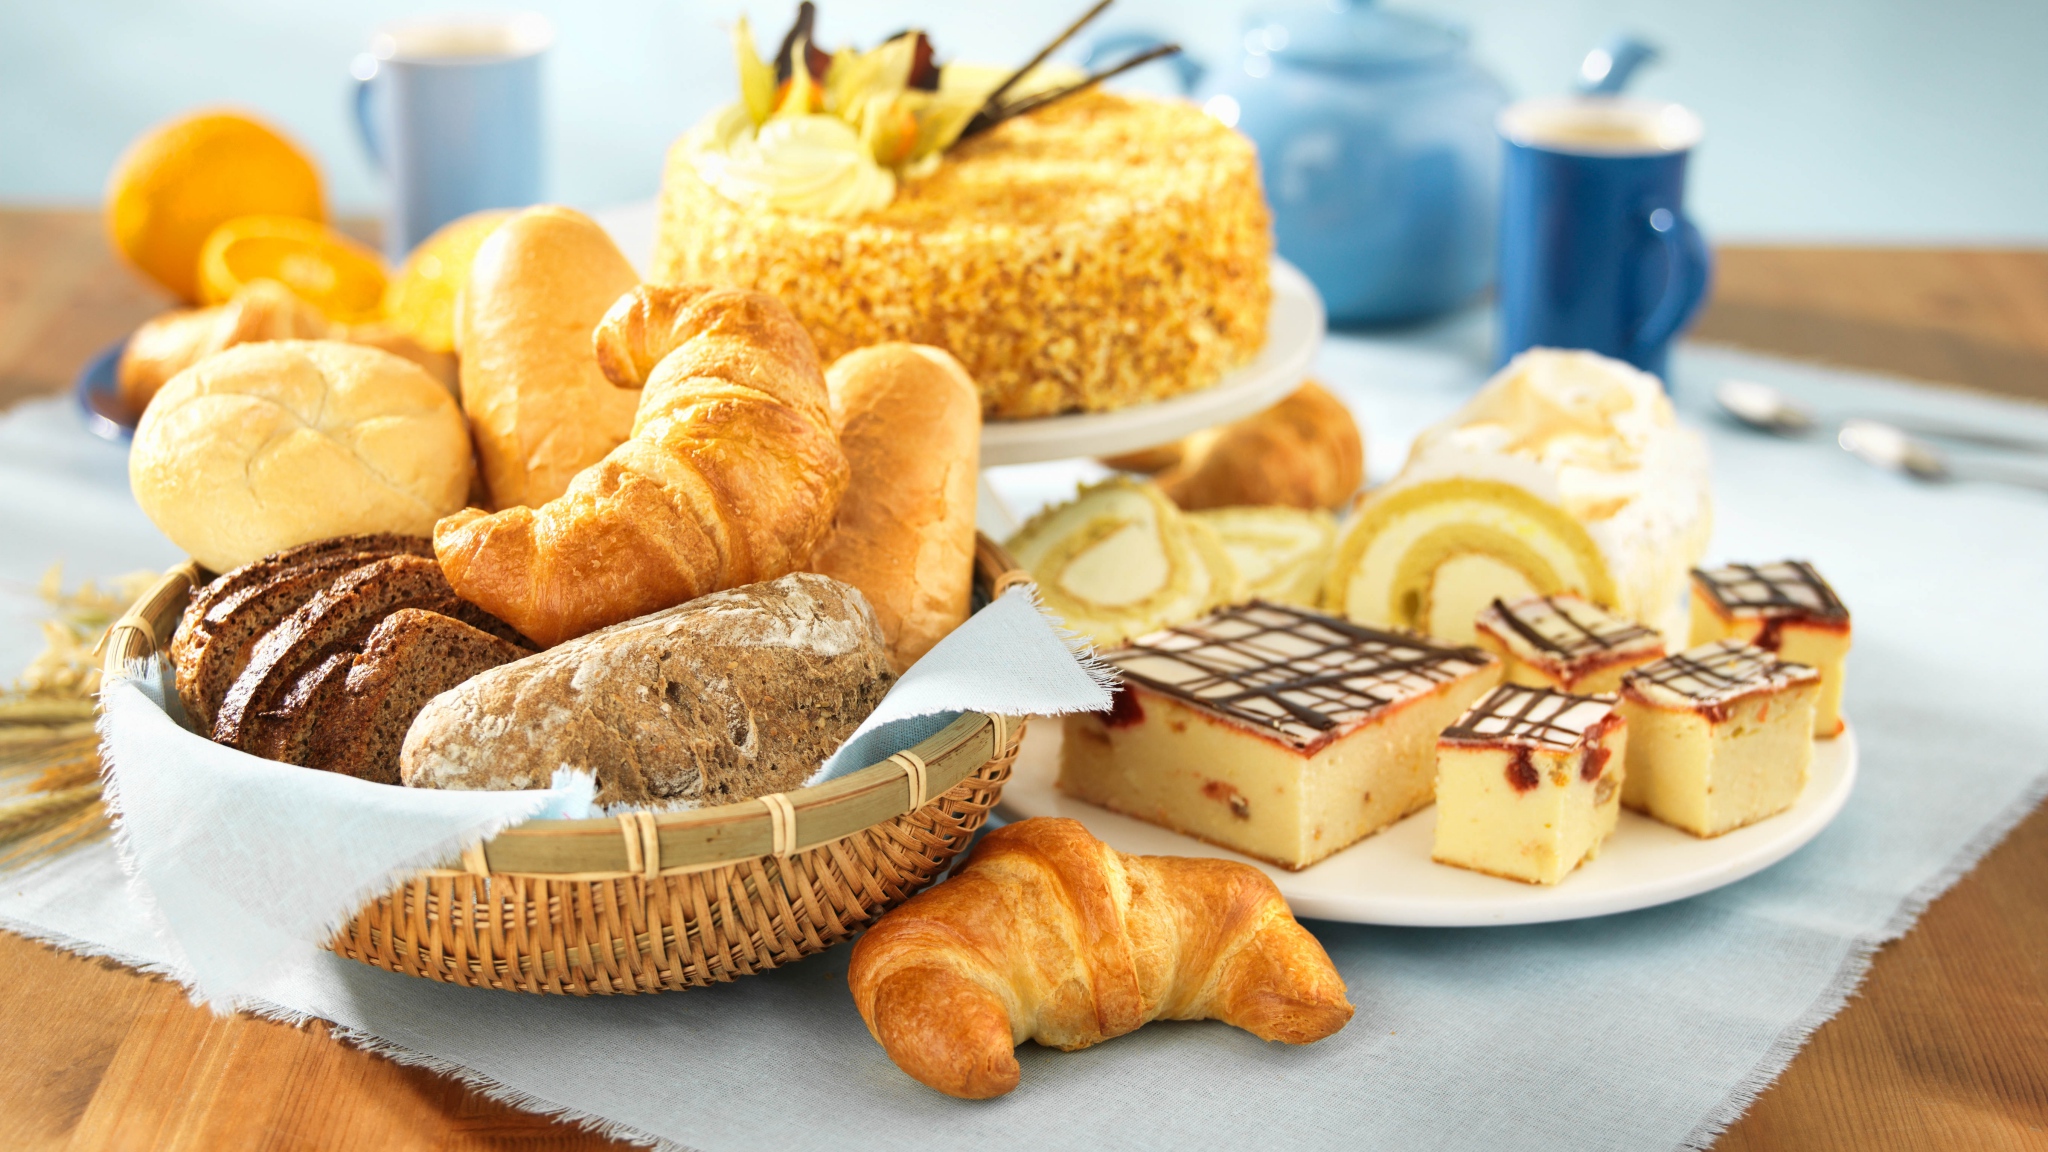 Pastries Background Wallpaper